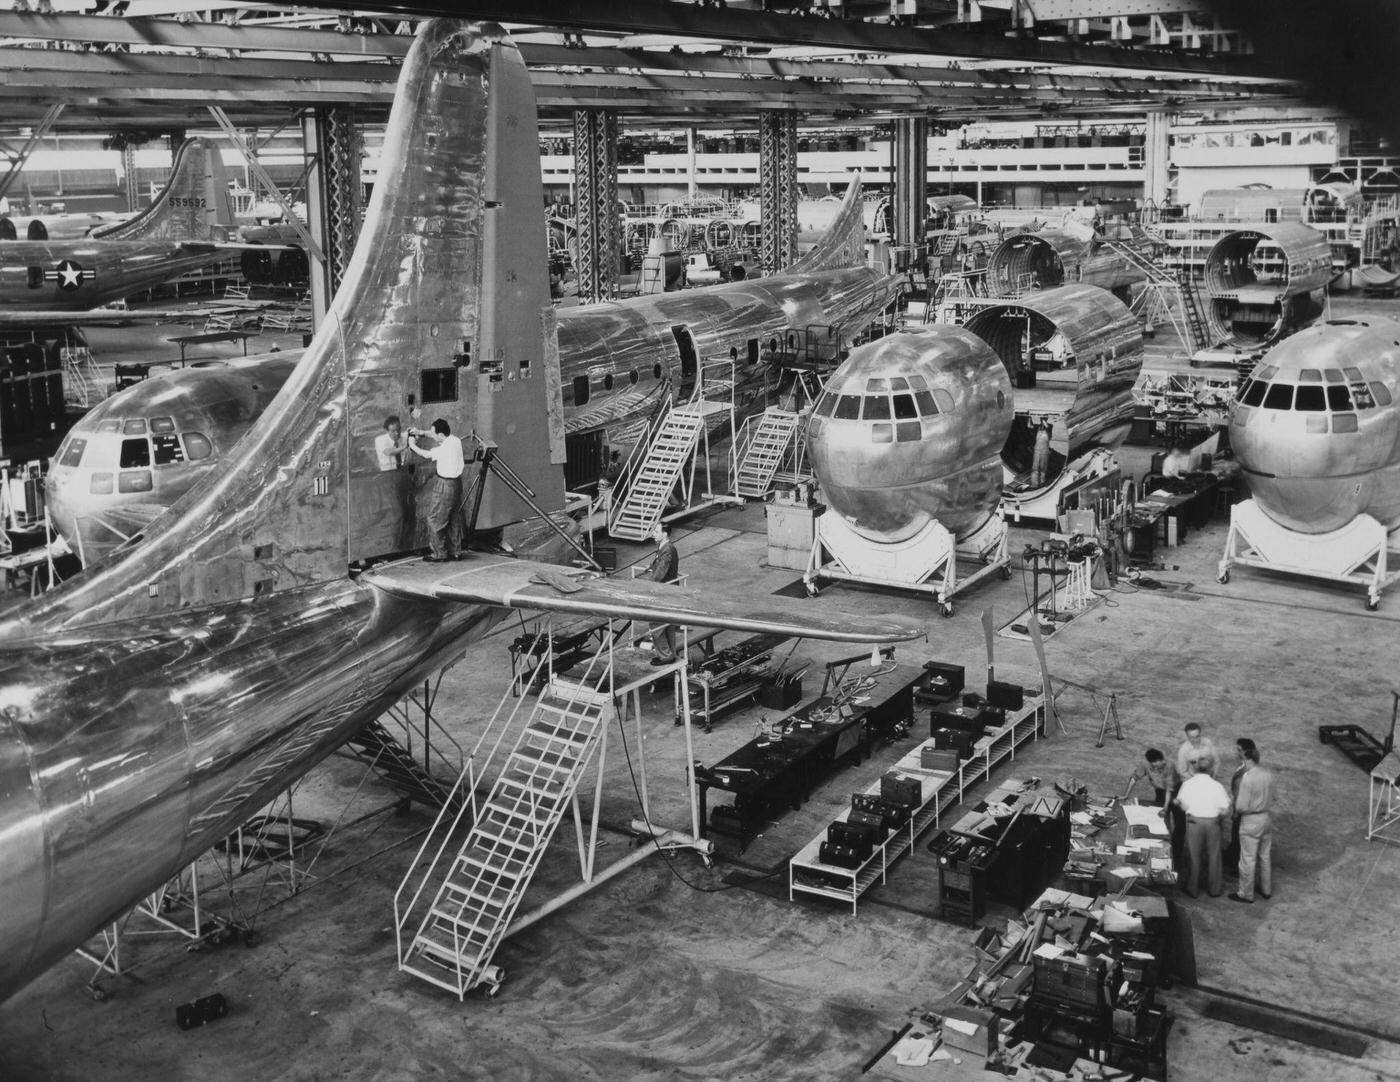 The factory floor of the Boeing Aircraft Company is shown featuring the manufacture of their Stratocruiser airliner.